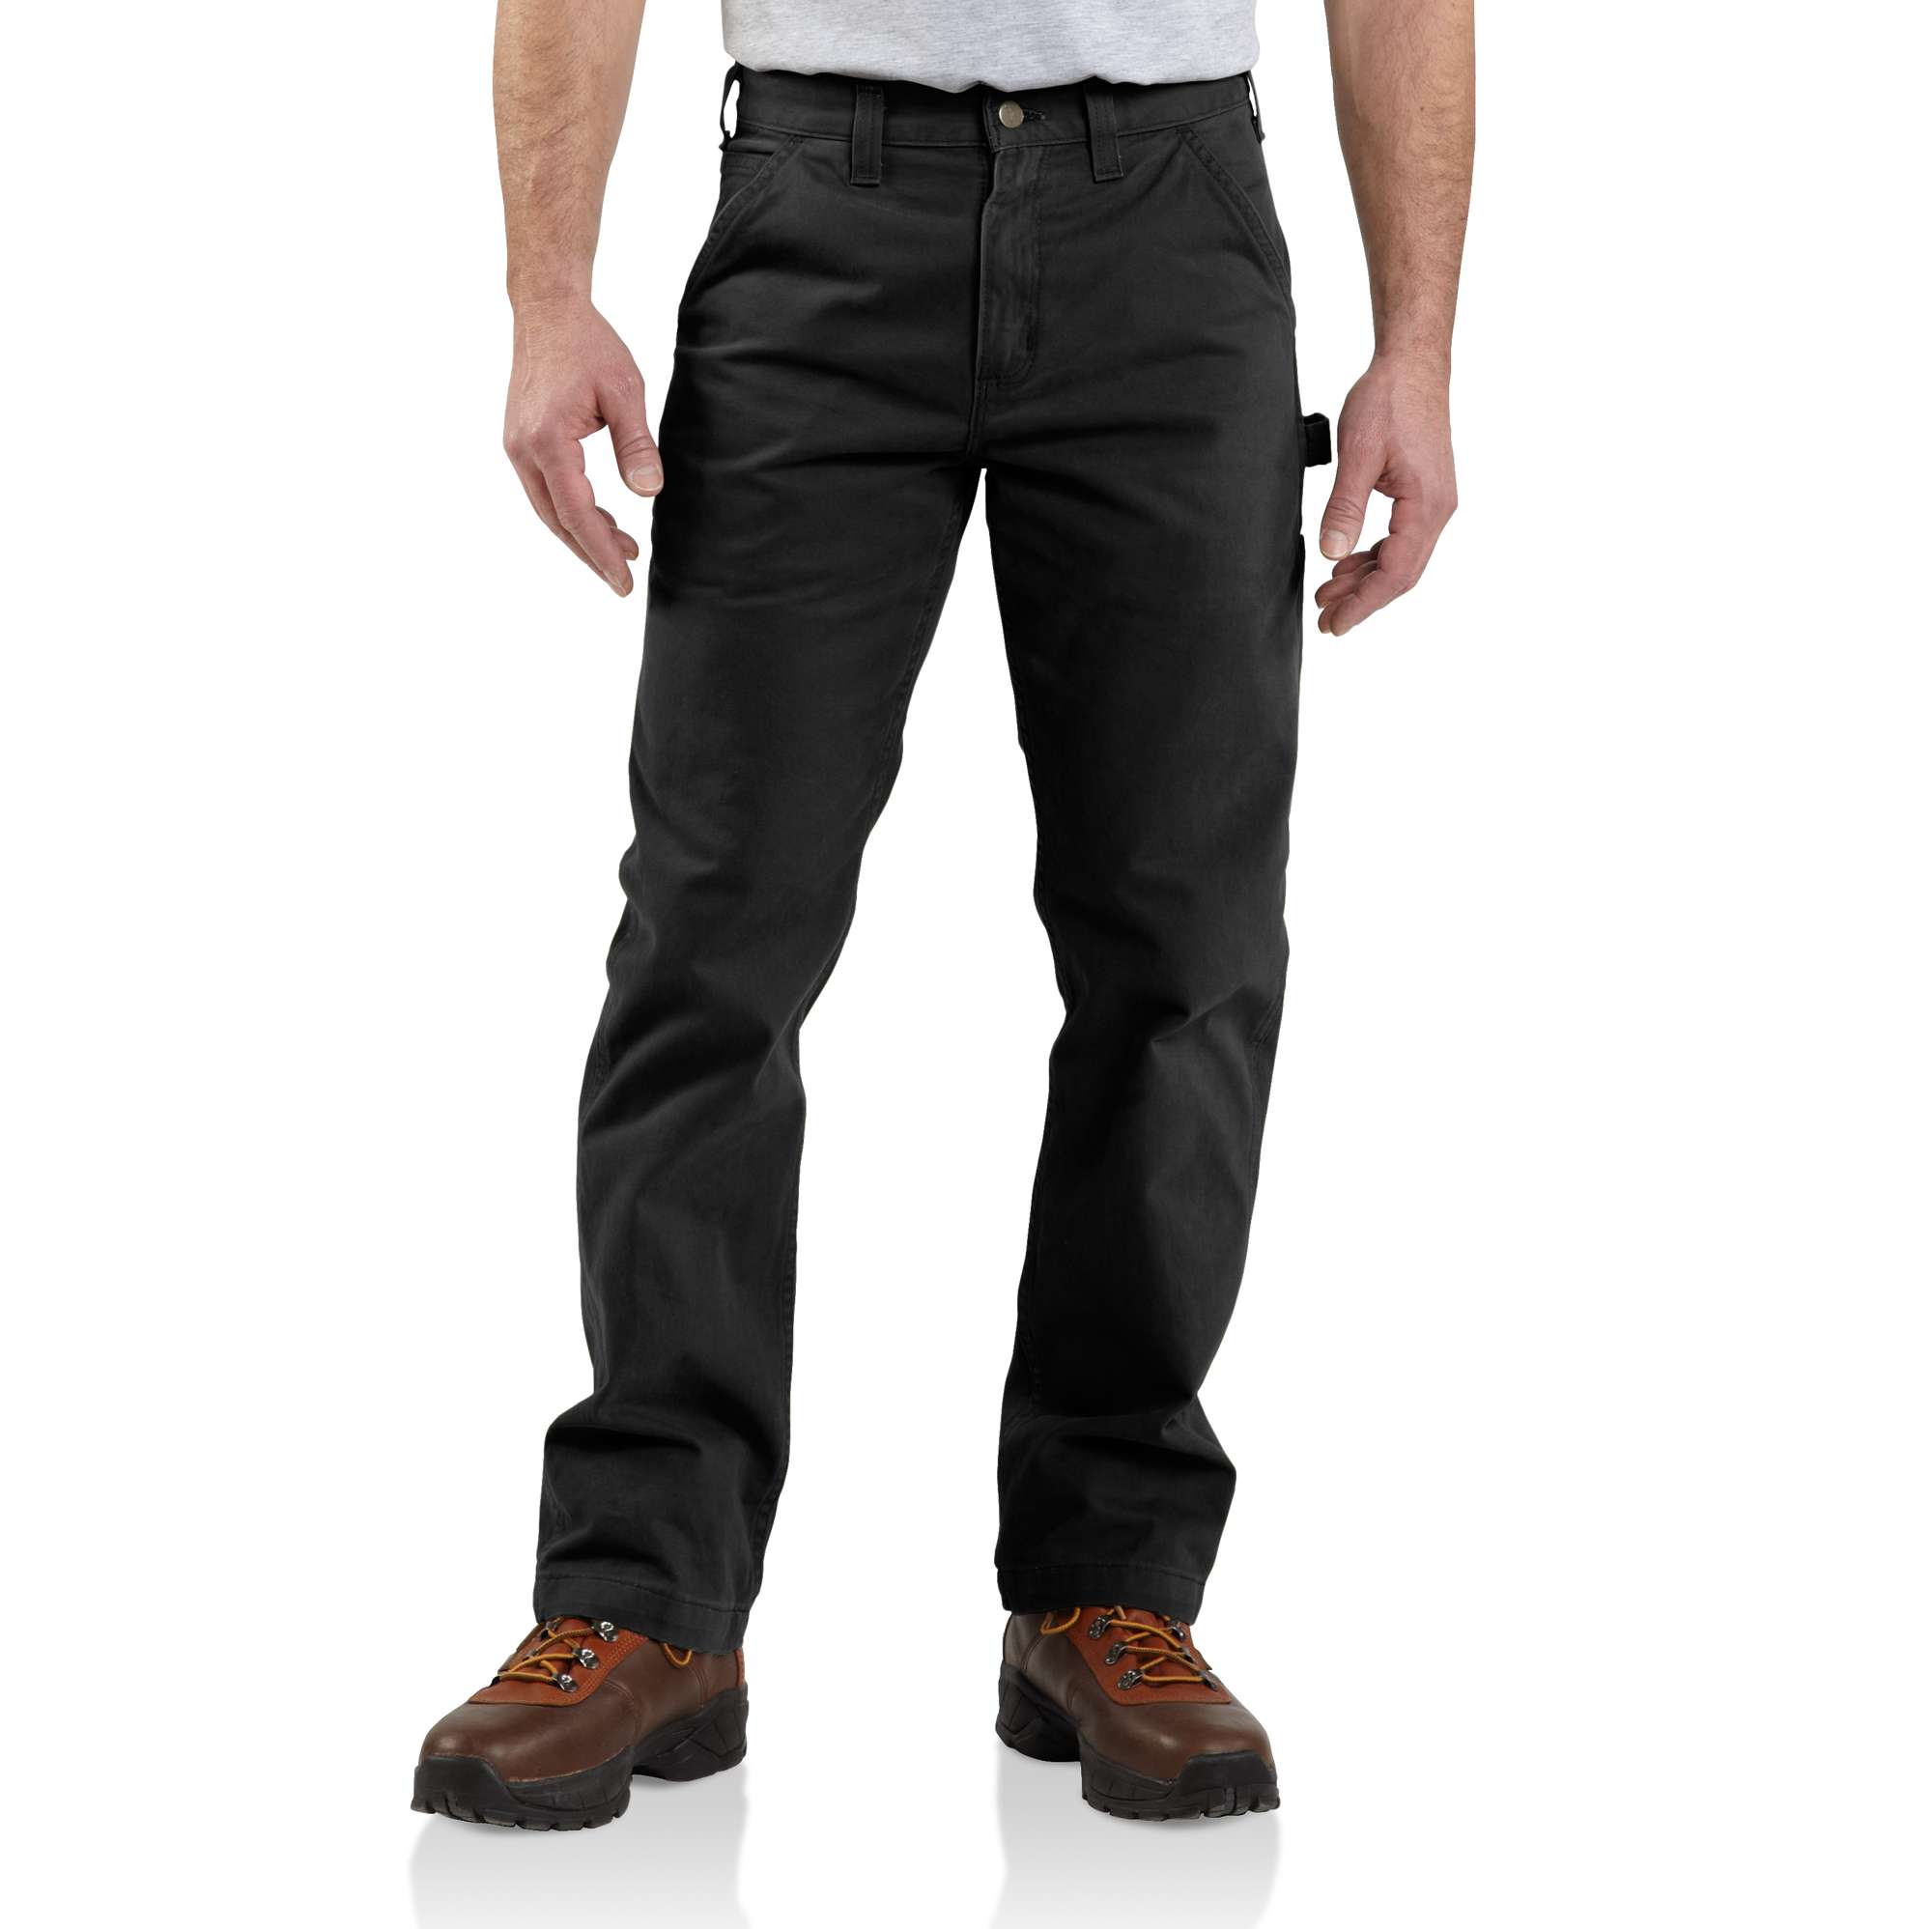 100% Cotton Rip - Stop Pants - 85160, Tactical Clothing at Sportsman's Guide